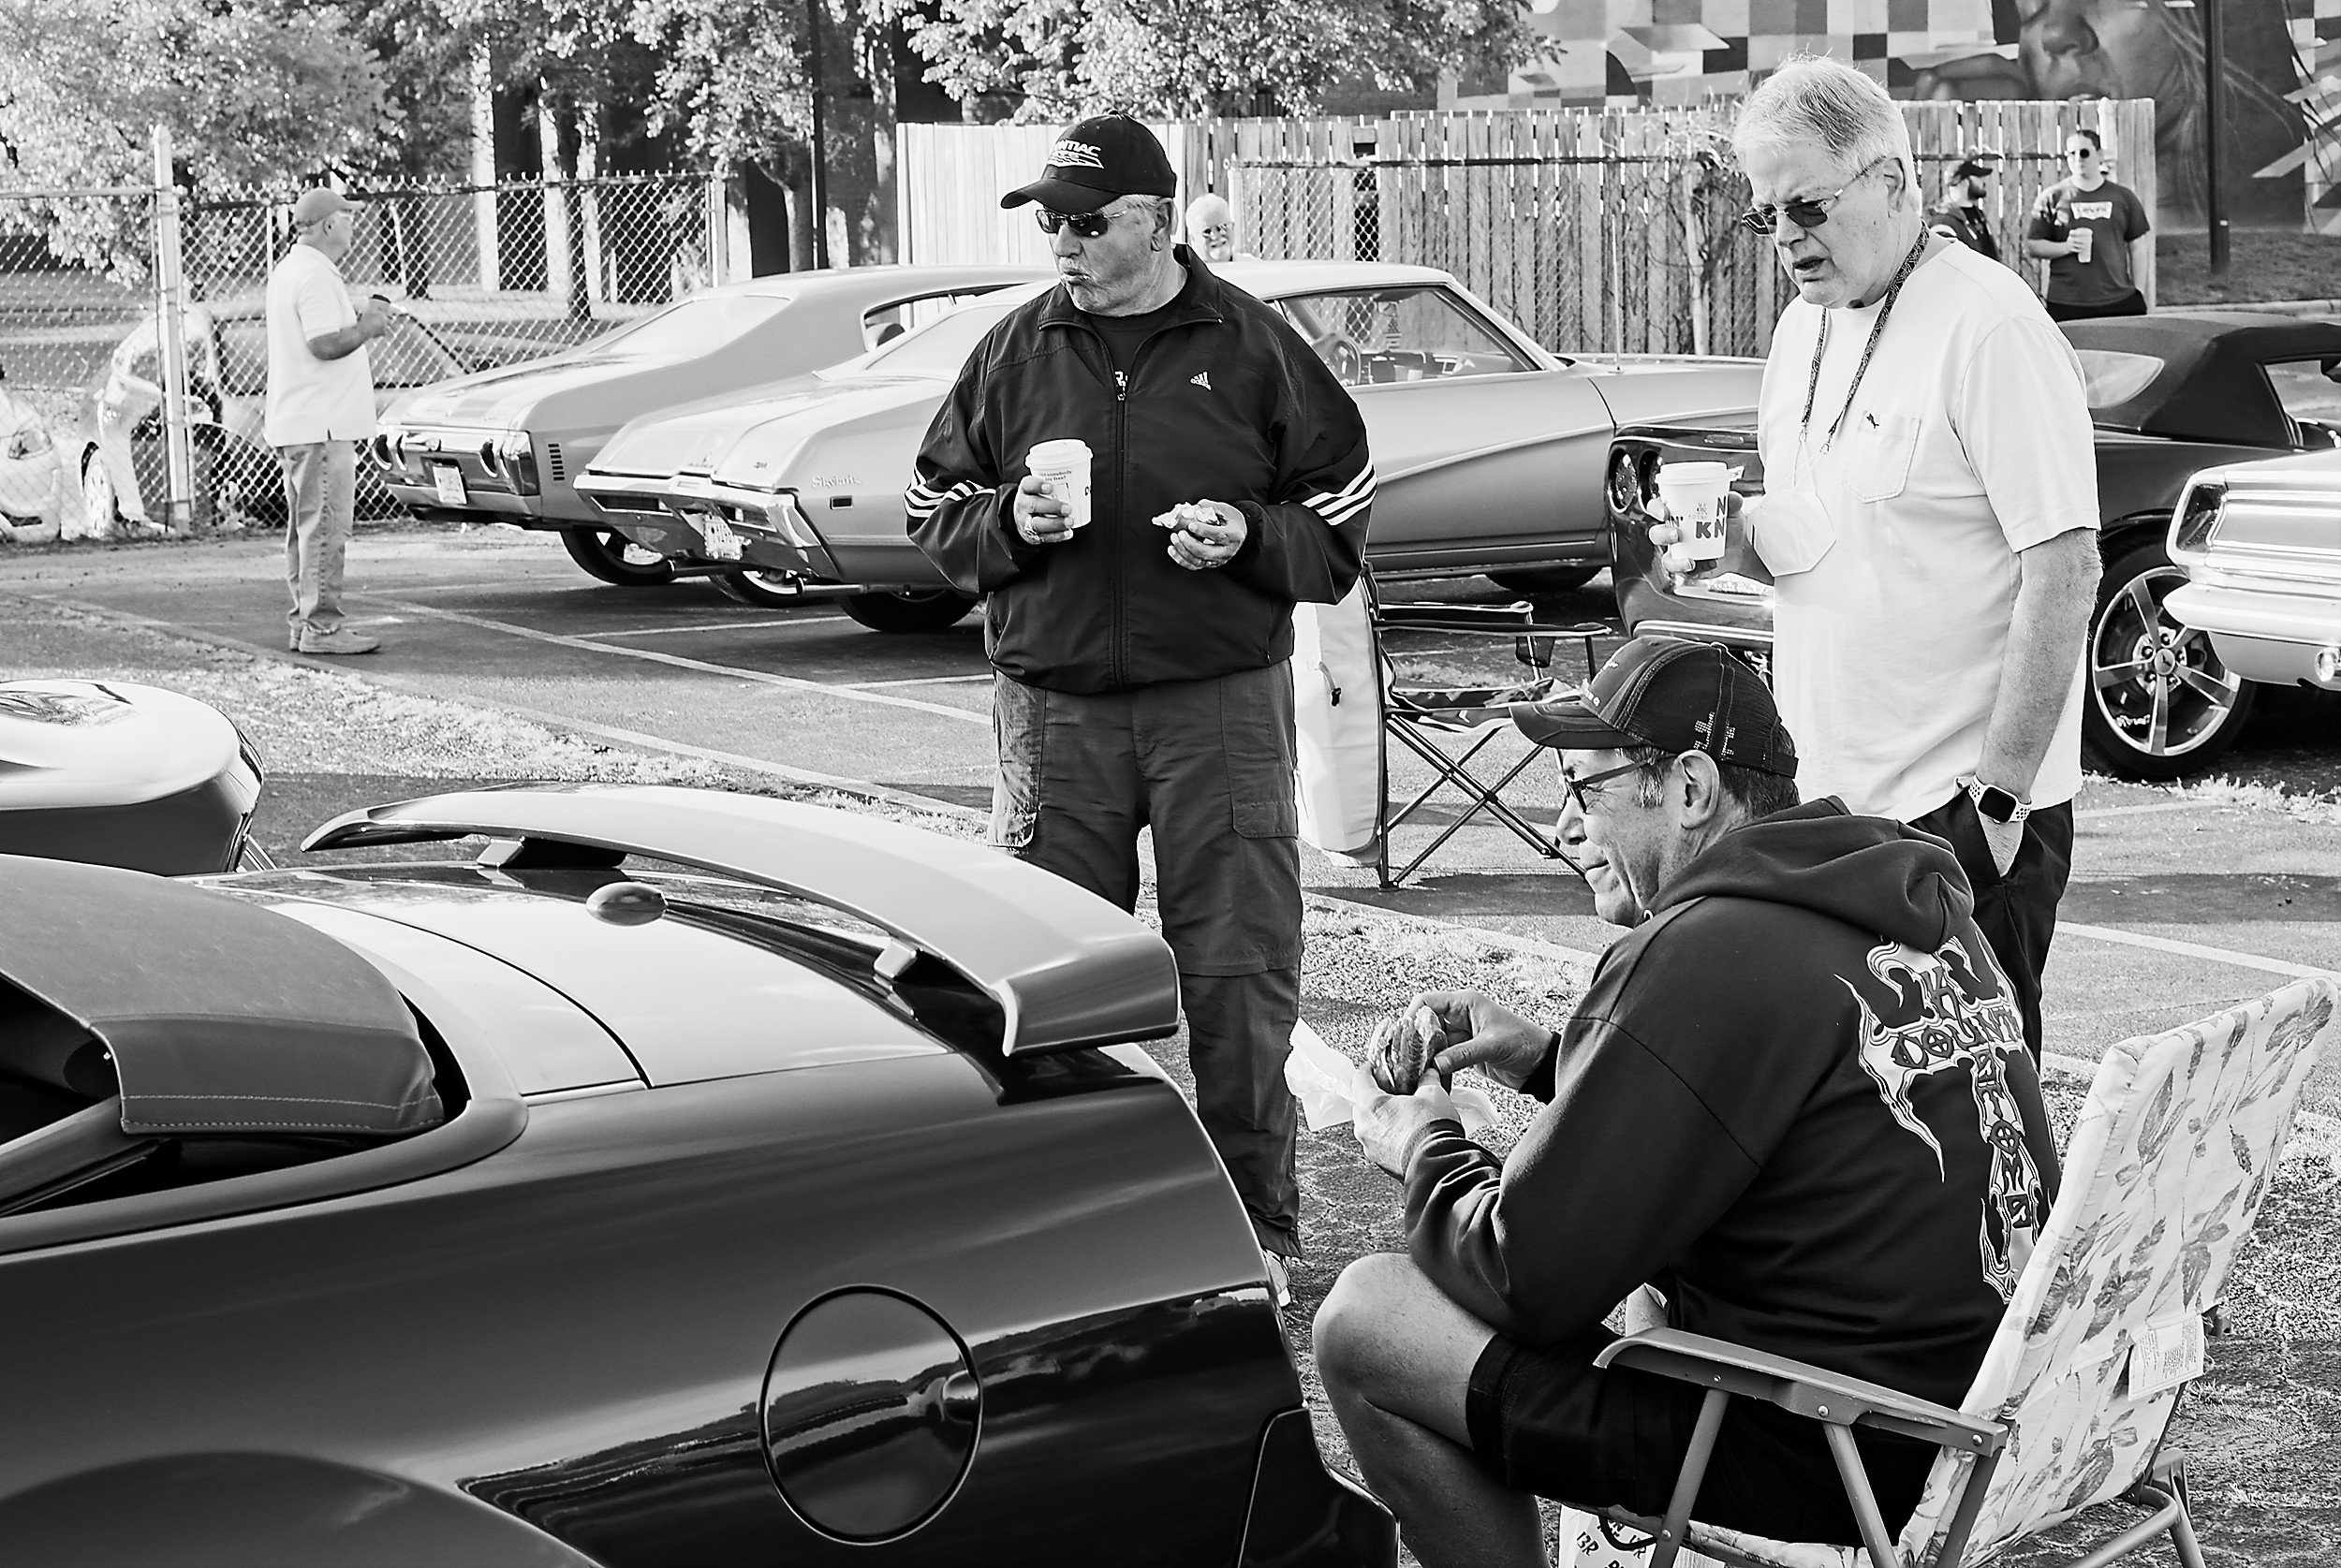  black and white image of three man looking at a car at a vintage car show, one is seated 